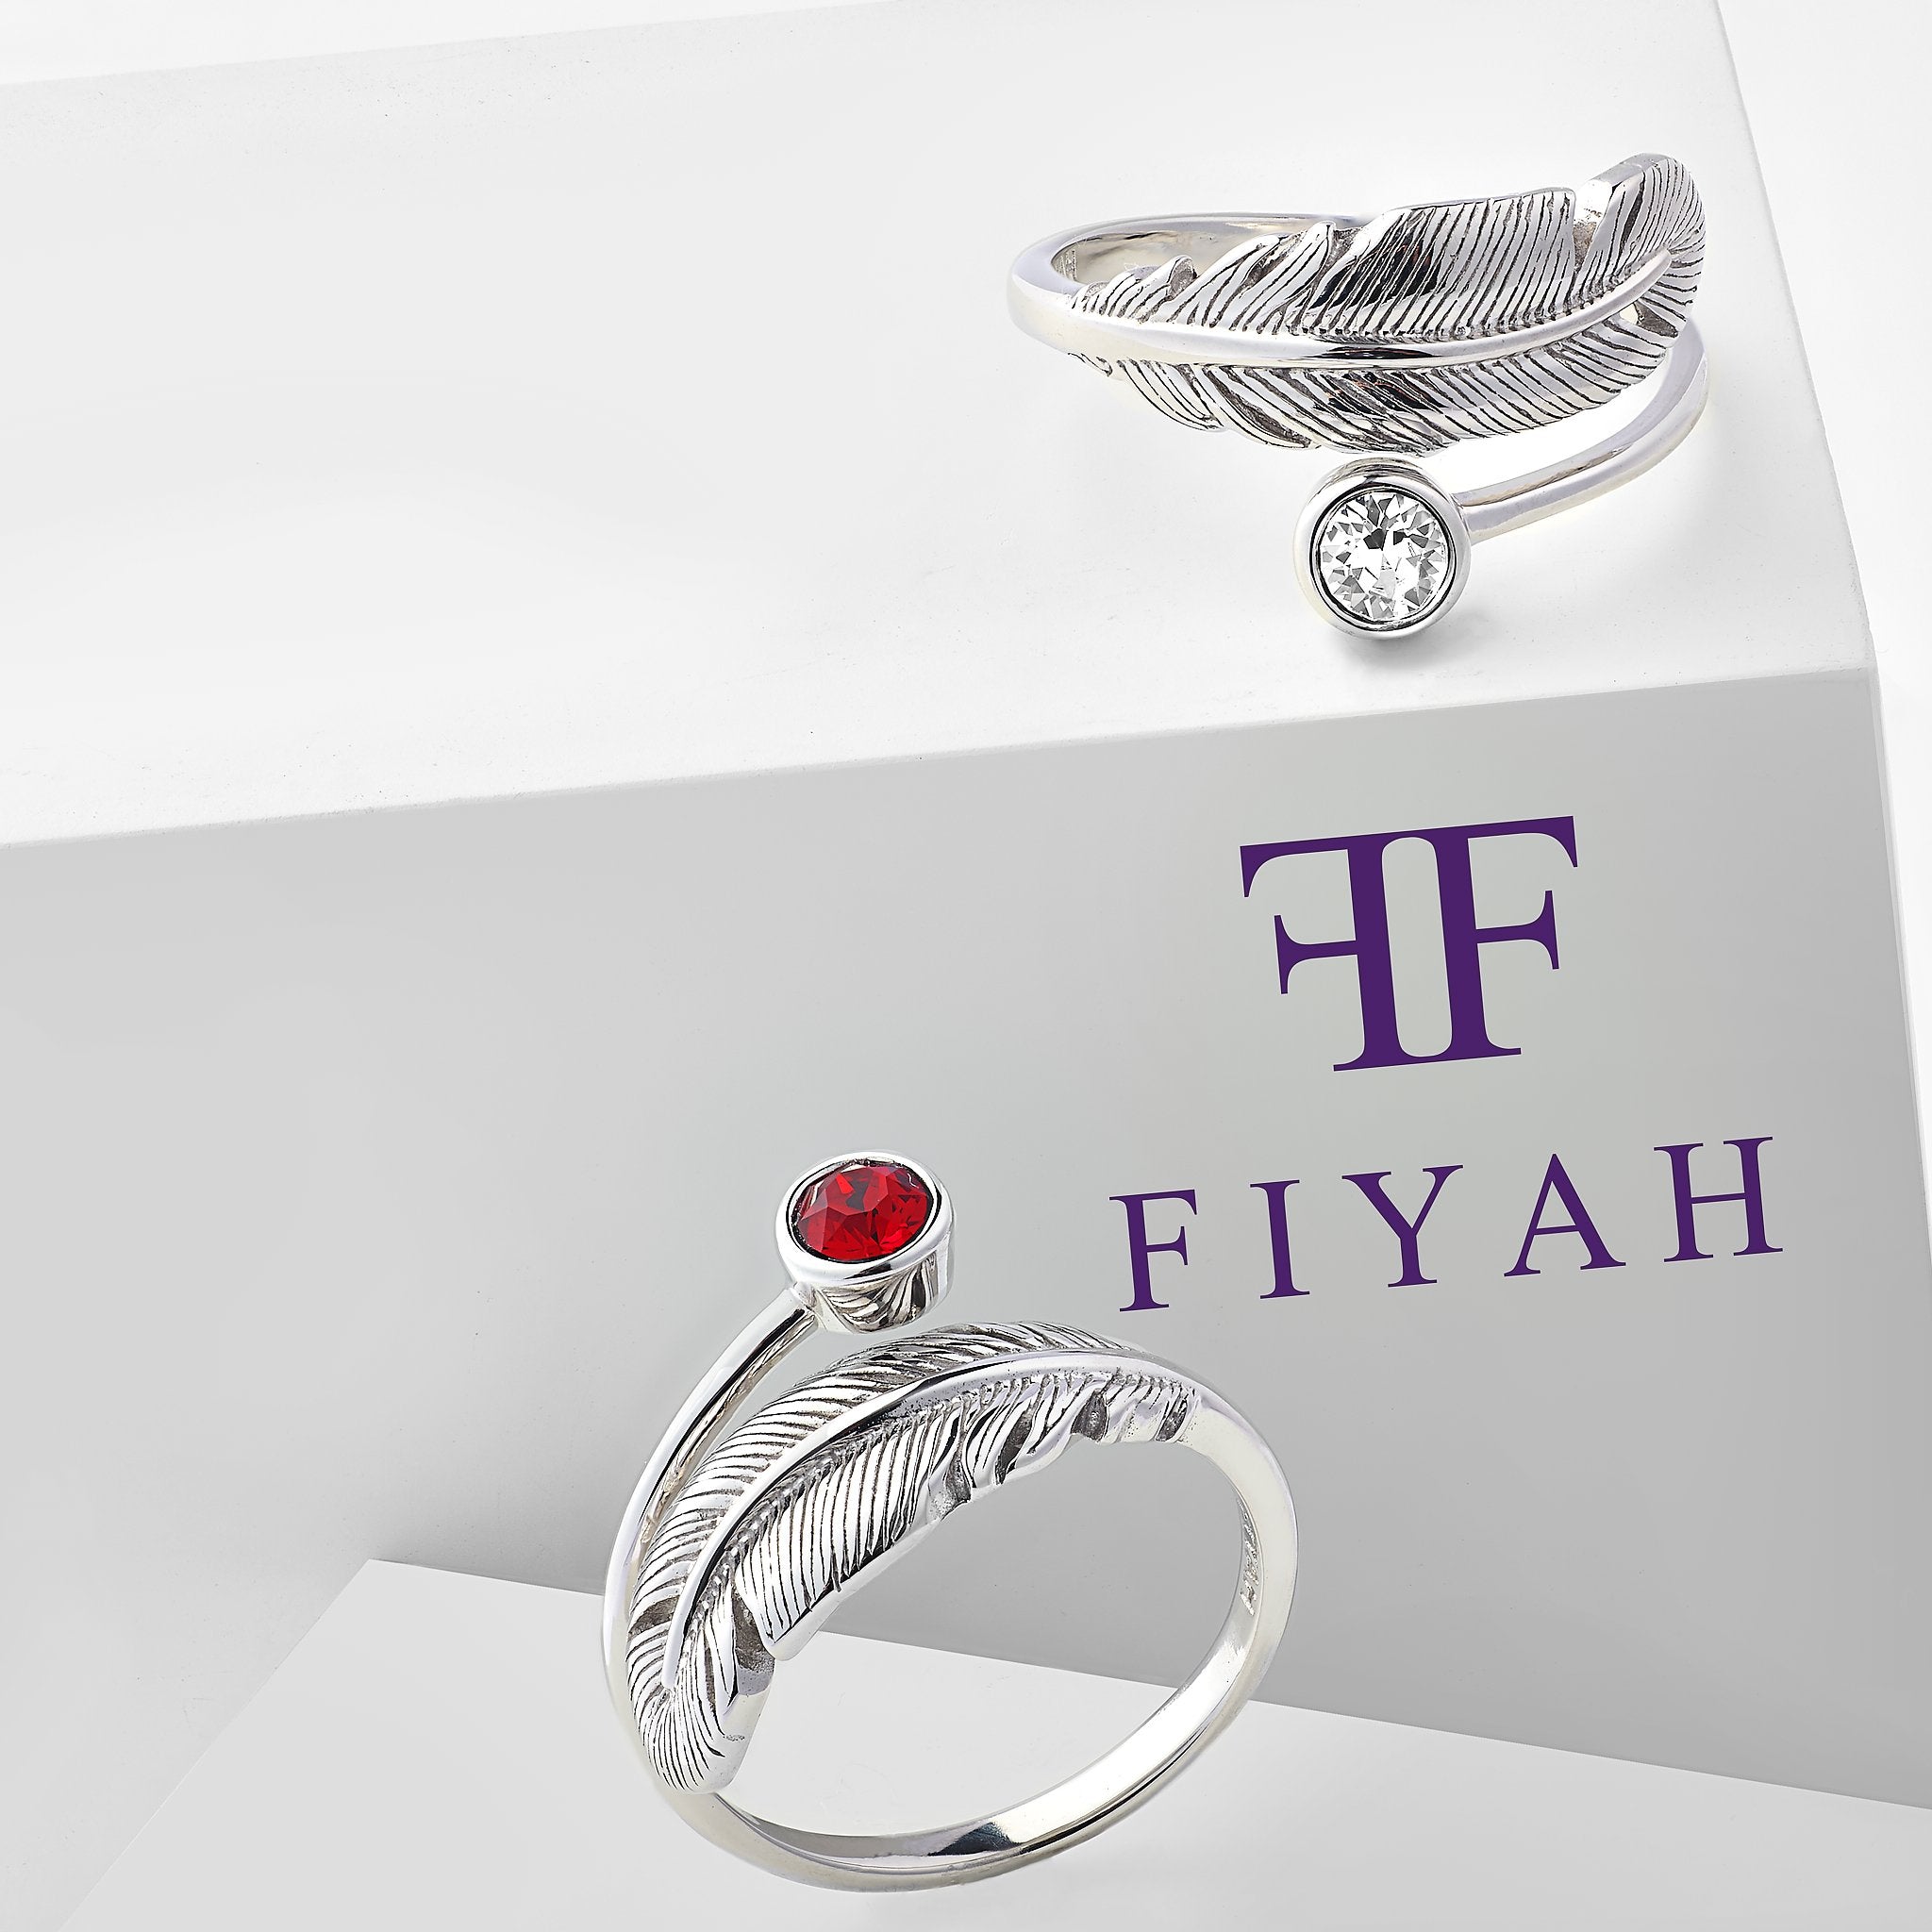 Feather birthstone rings display